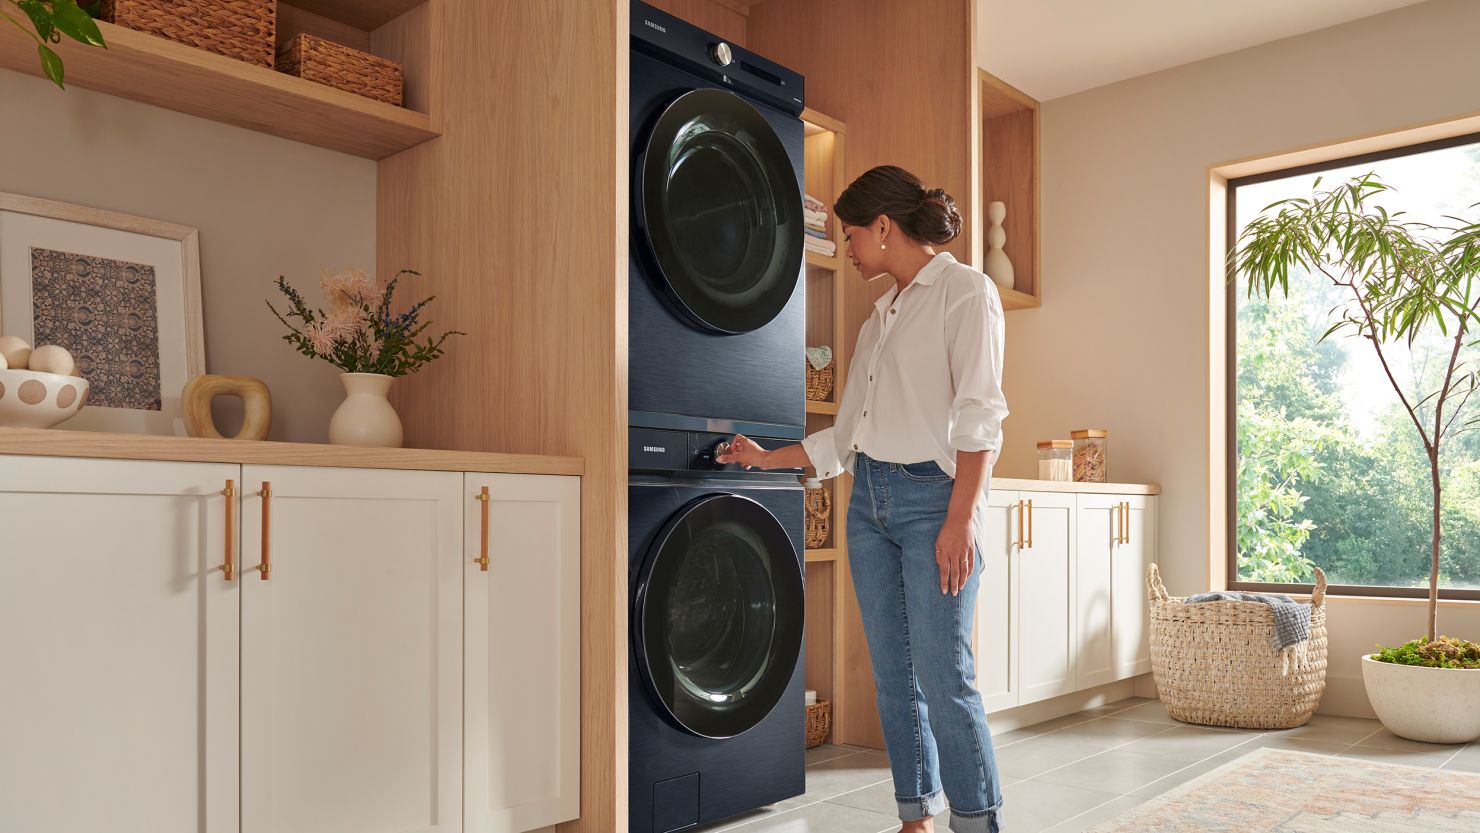 https://media.cnn.com/api/v1/images/stellar/prod/underscored-samsung-bespoke-ultra-capacity-ai-front-load-washer-and-electric-dryer-in-brushed-navy-3.jpg?c=16x9&q=h_833,w_1480,c_fill